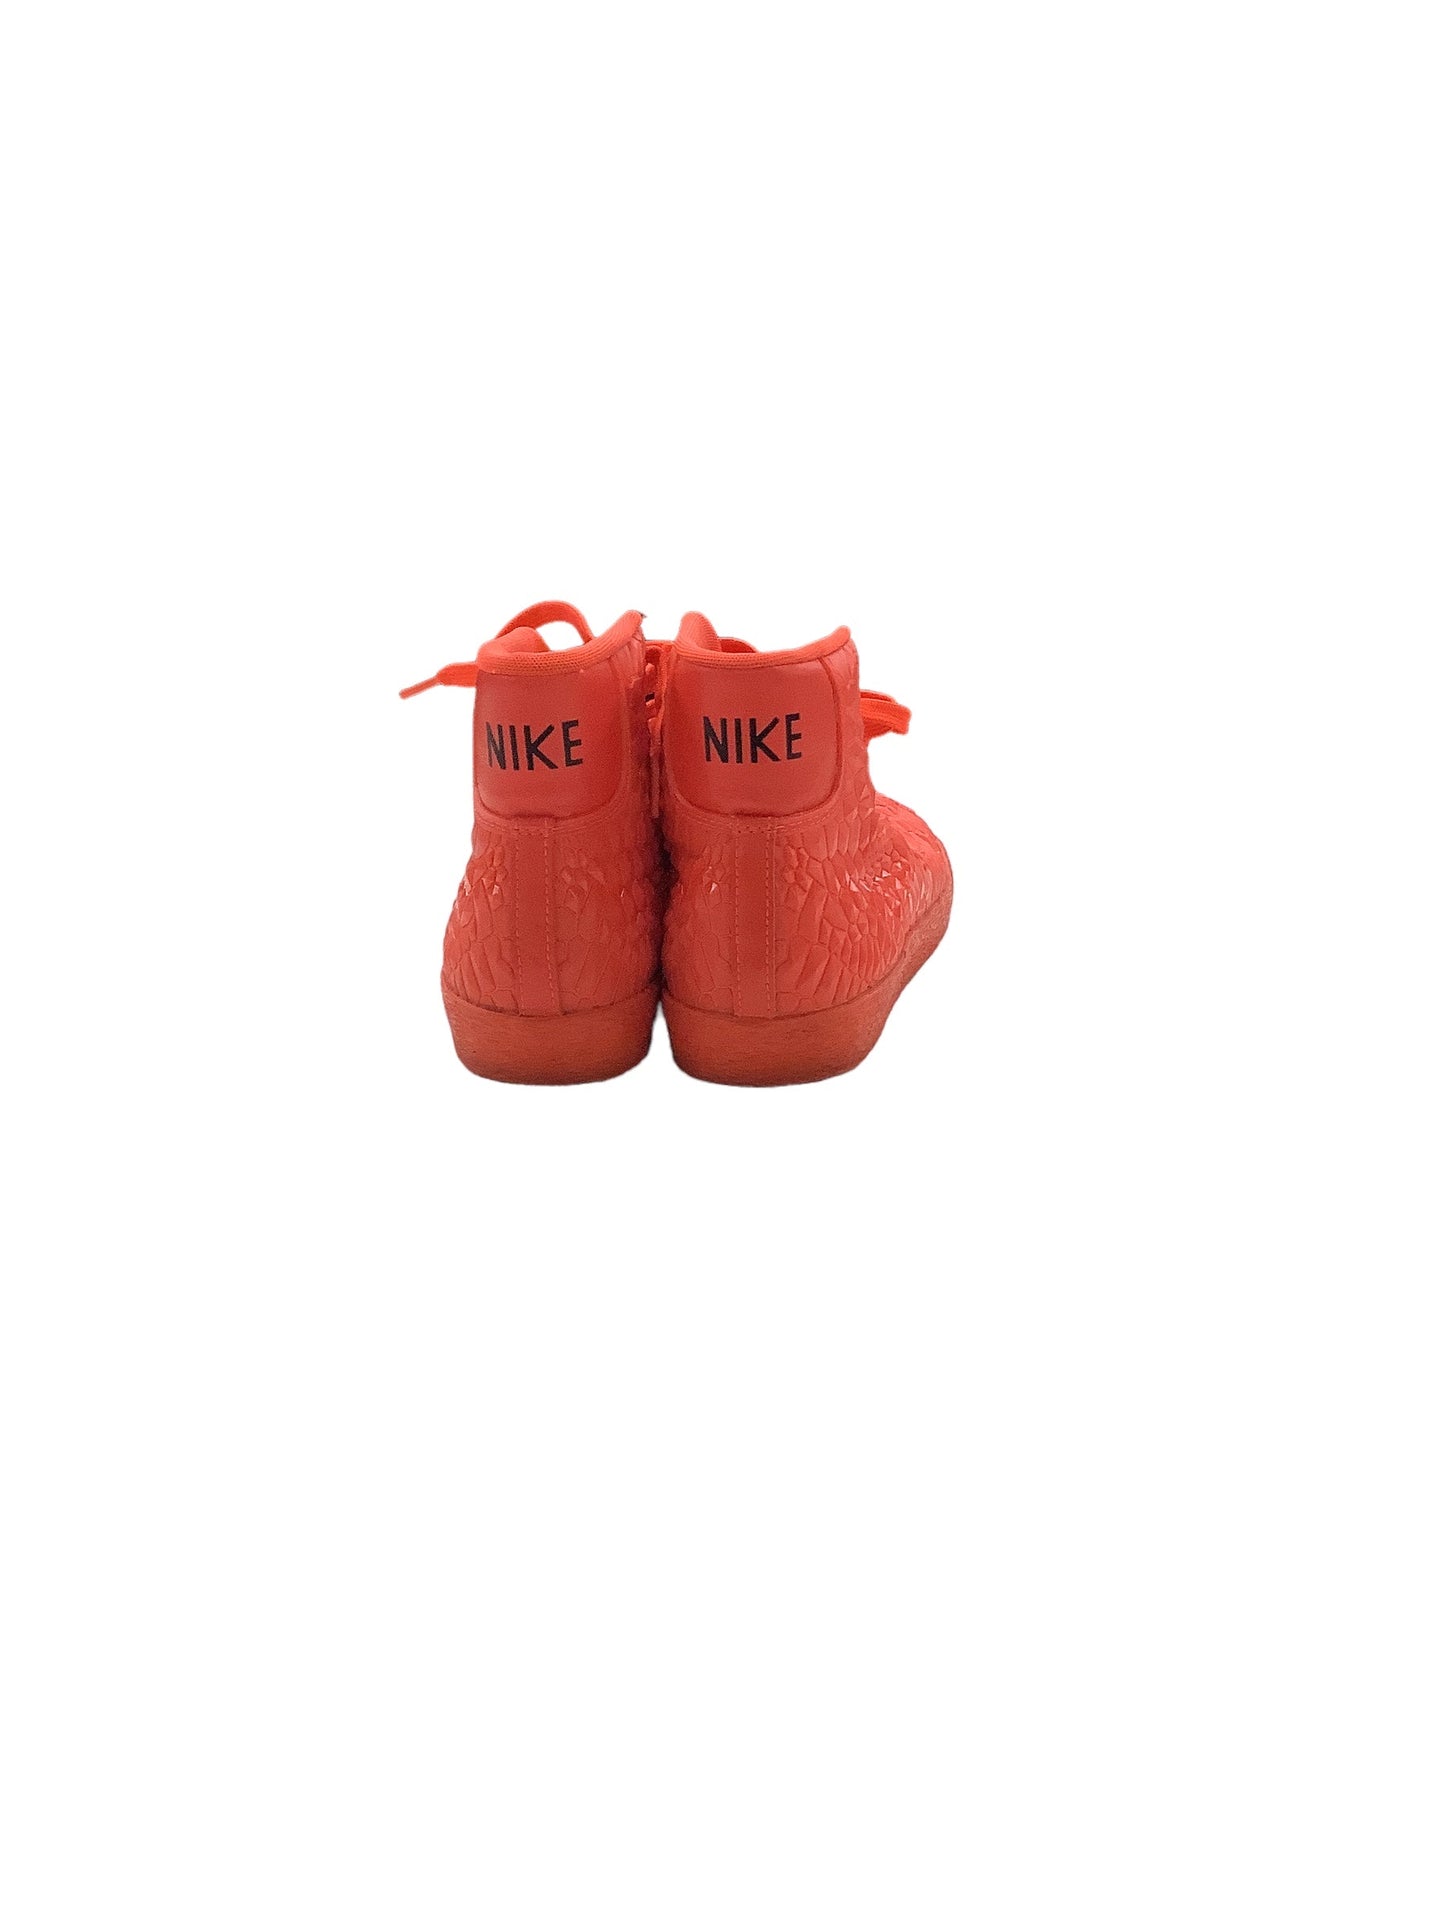 Shoes Sneakers By Nike  Size: 7